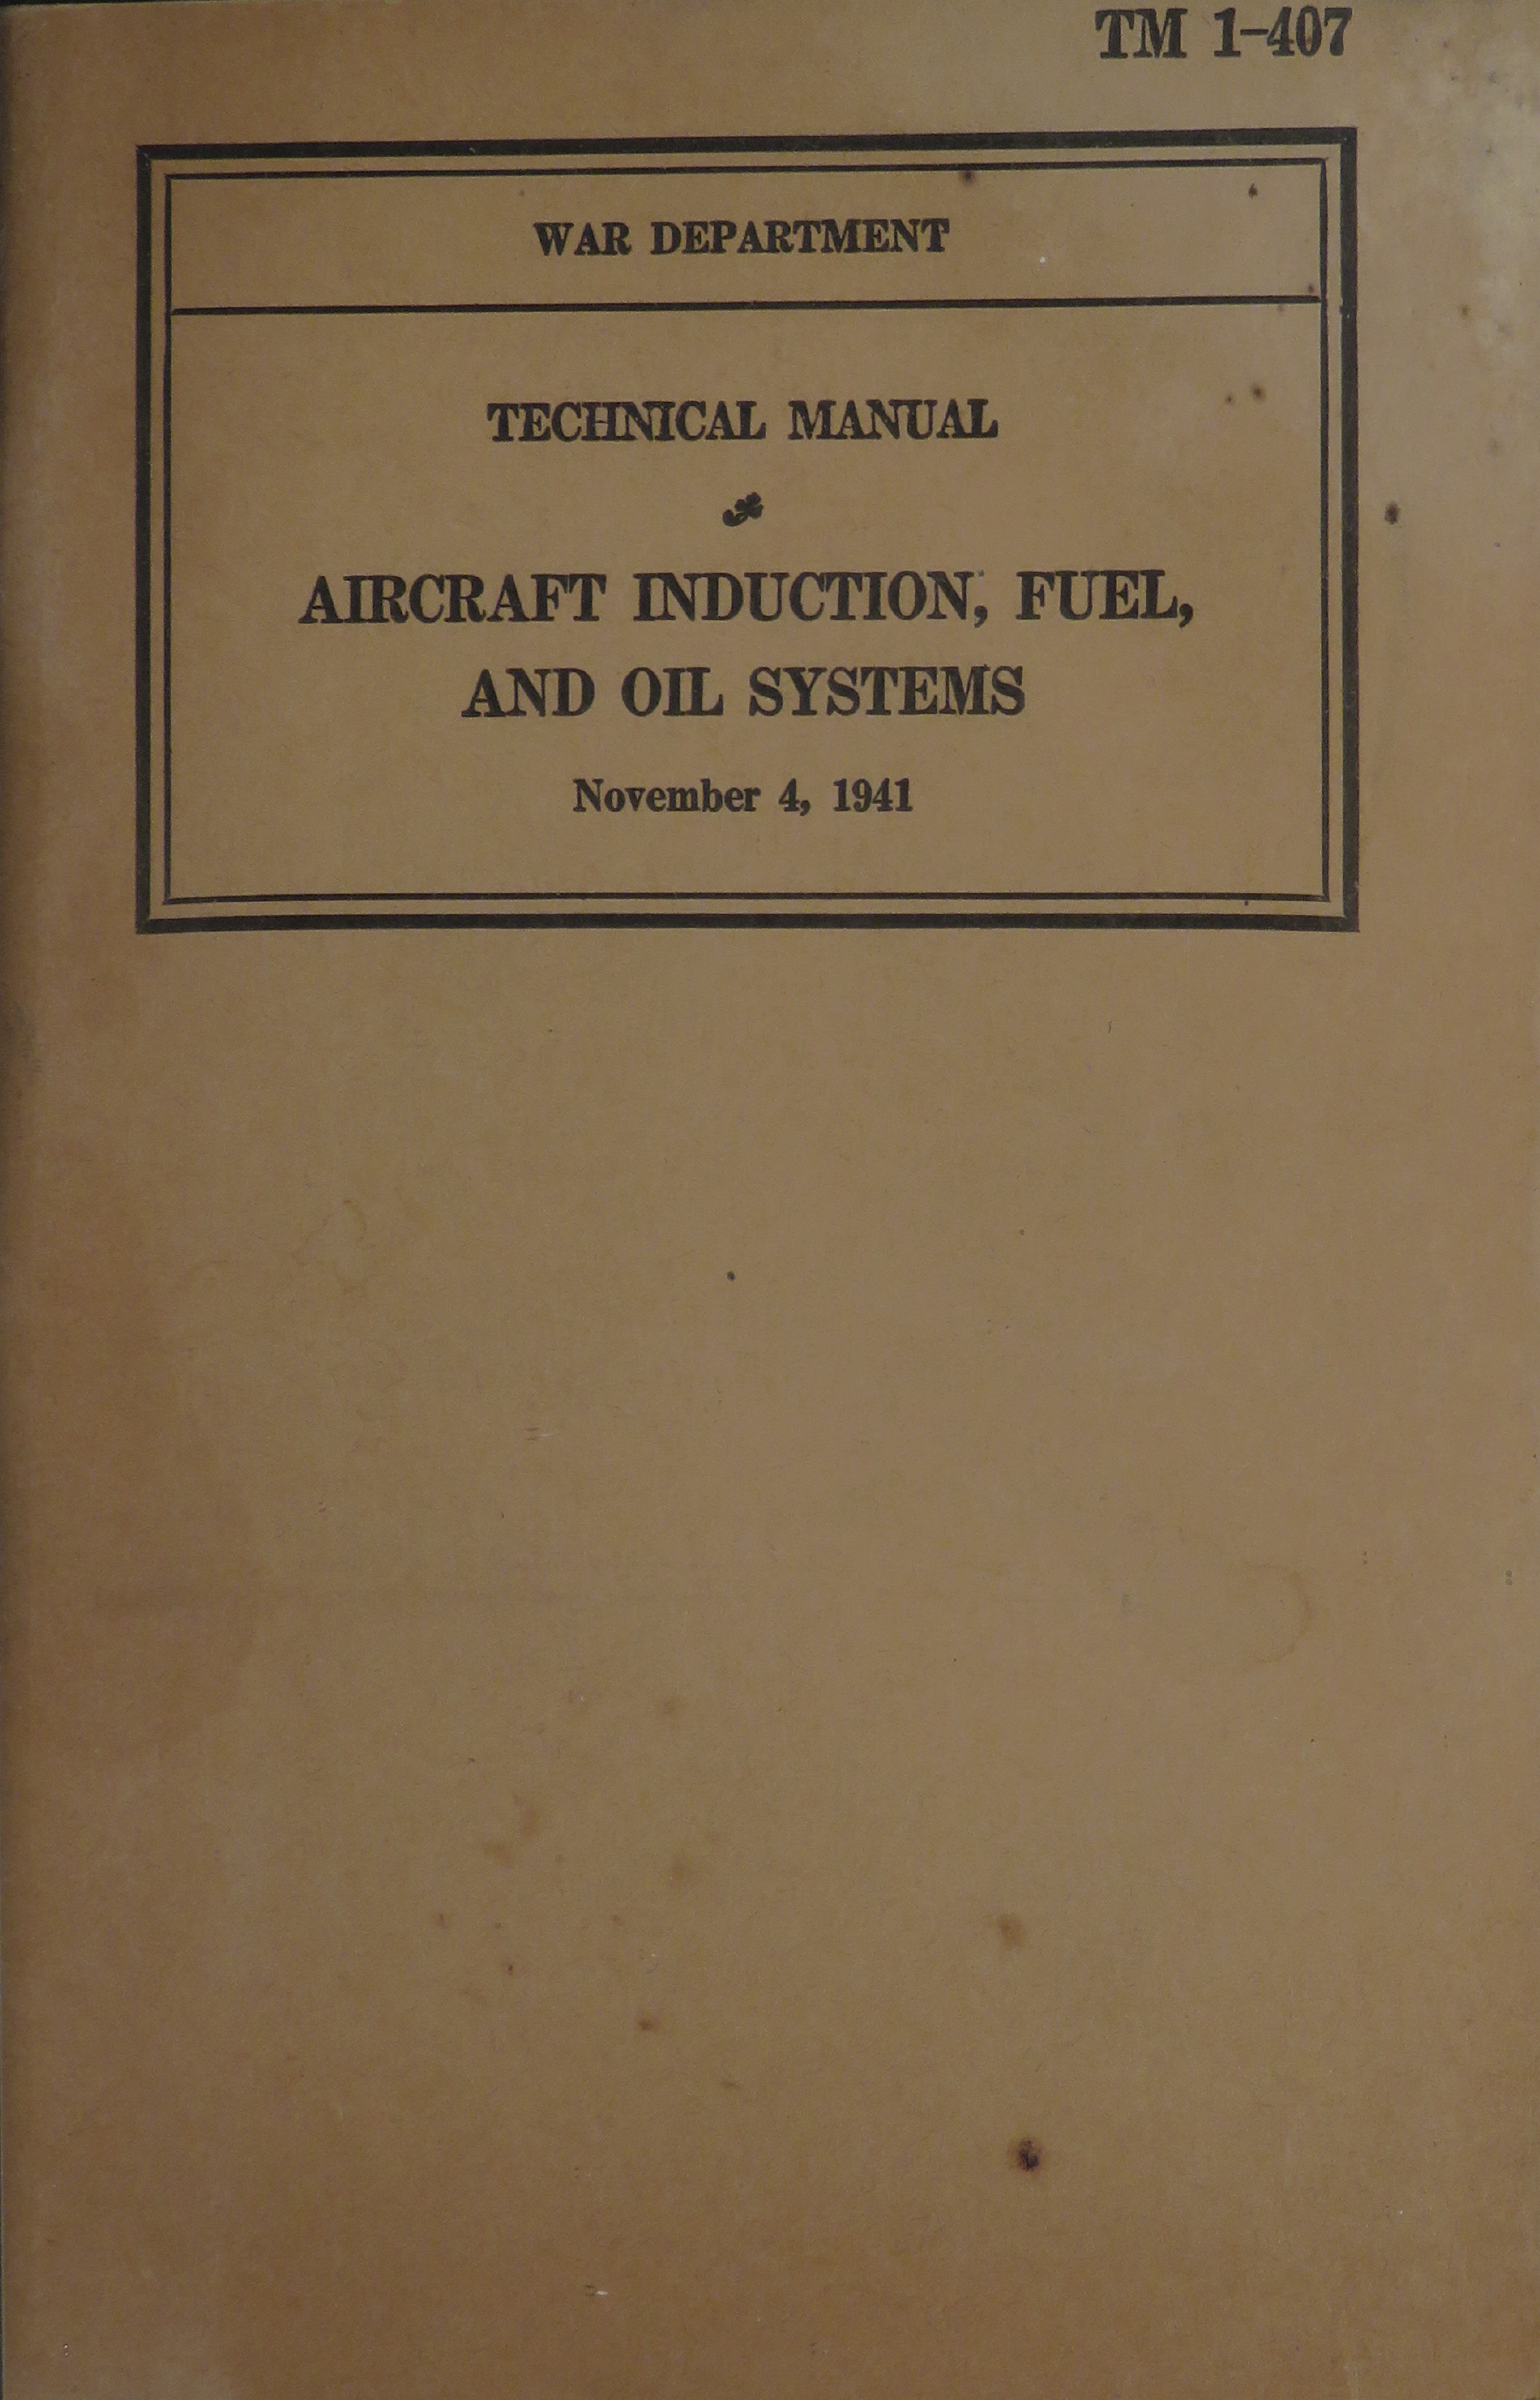 Sample page 1 from AirCorps Library document: Aircraft Induction, Fuel, and Oil Systems